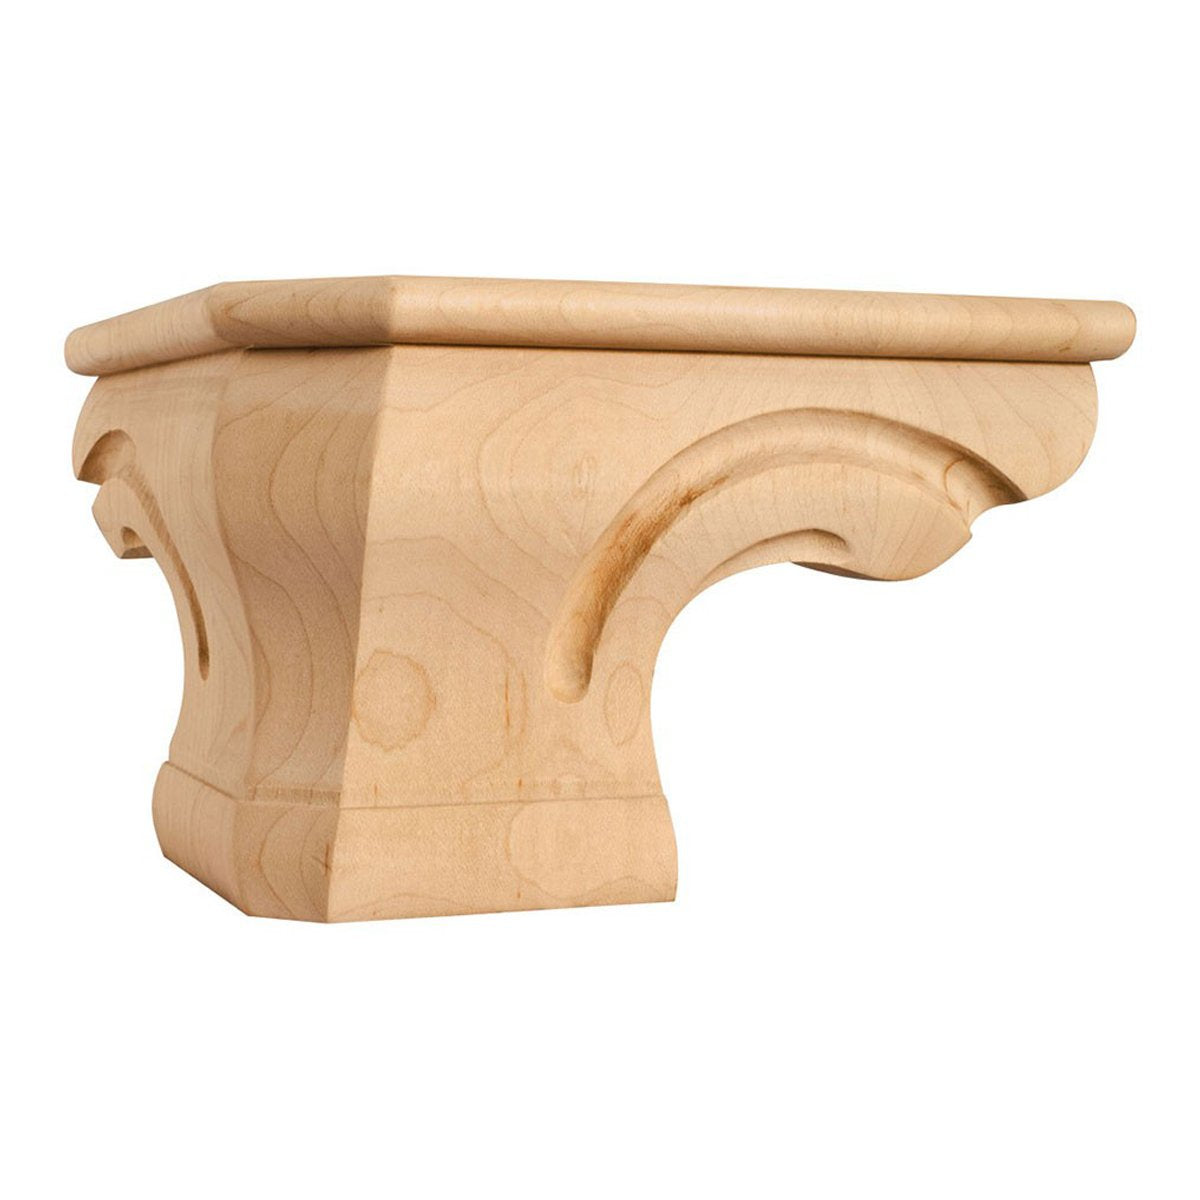 Hardware Resources Hard Maple Rounded Corner Pedestal Foot with Bead-DirectSinks